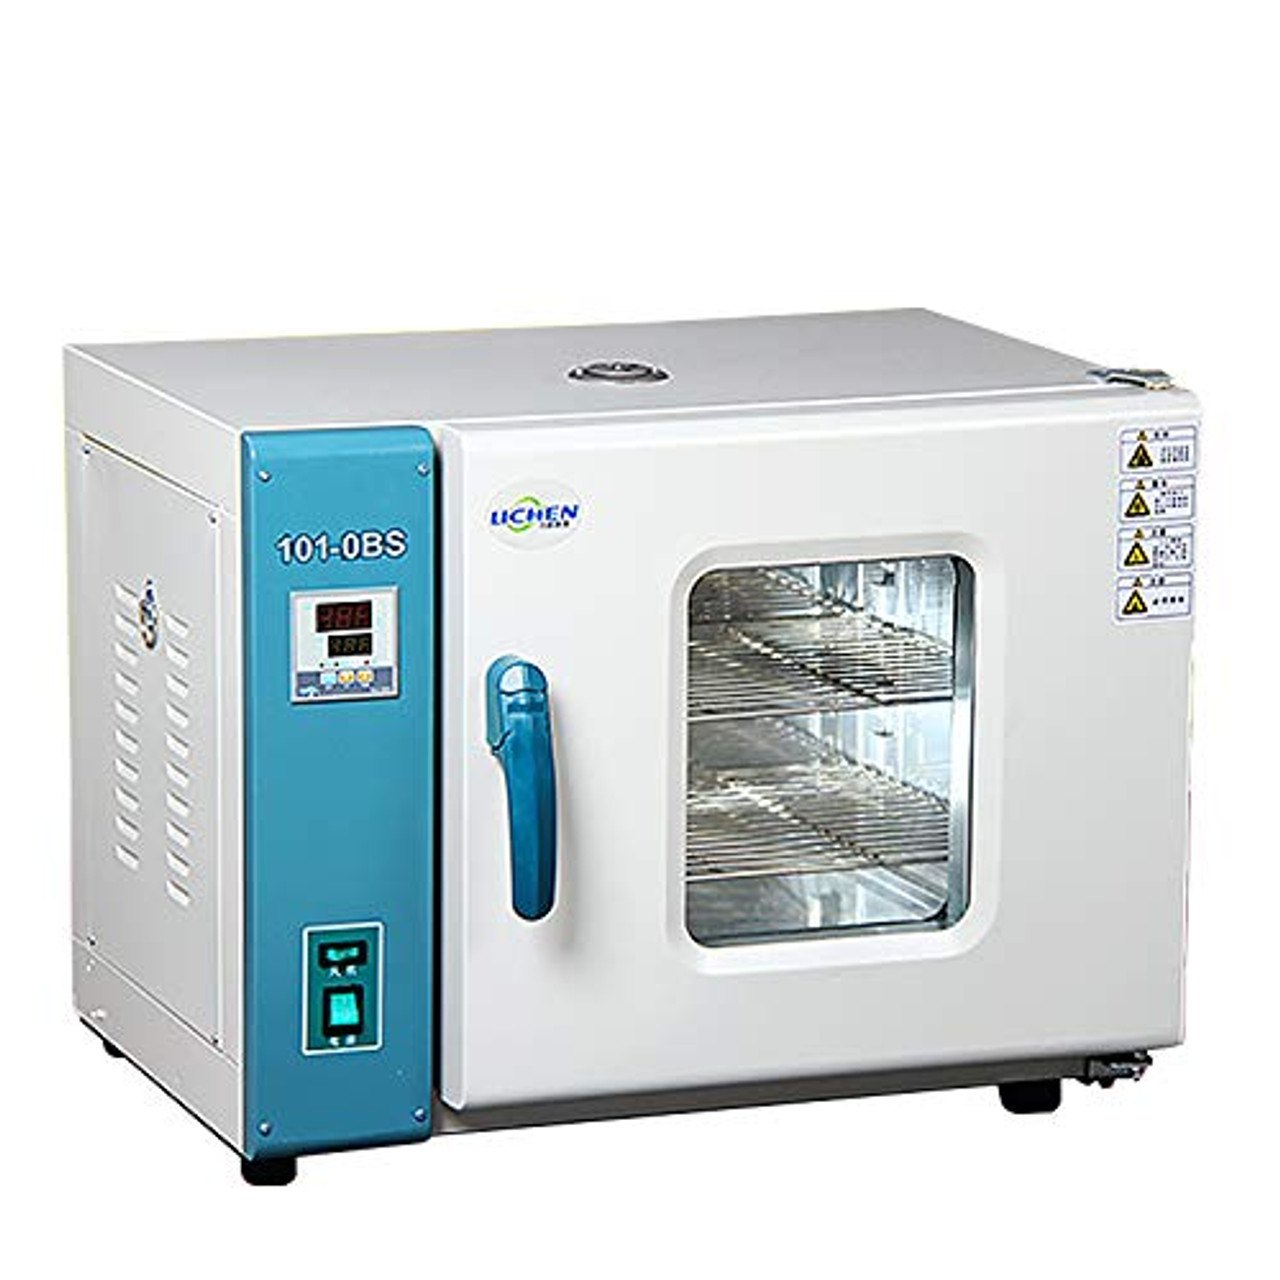 Blast drying oven laboratory silent constant temperature oven intelligent digital display drying electromechanical oven